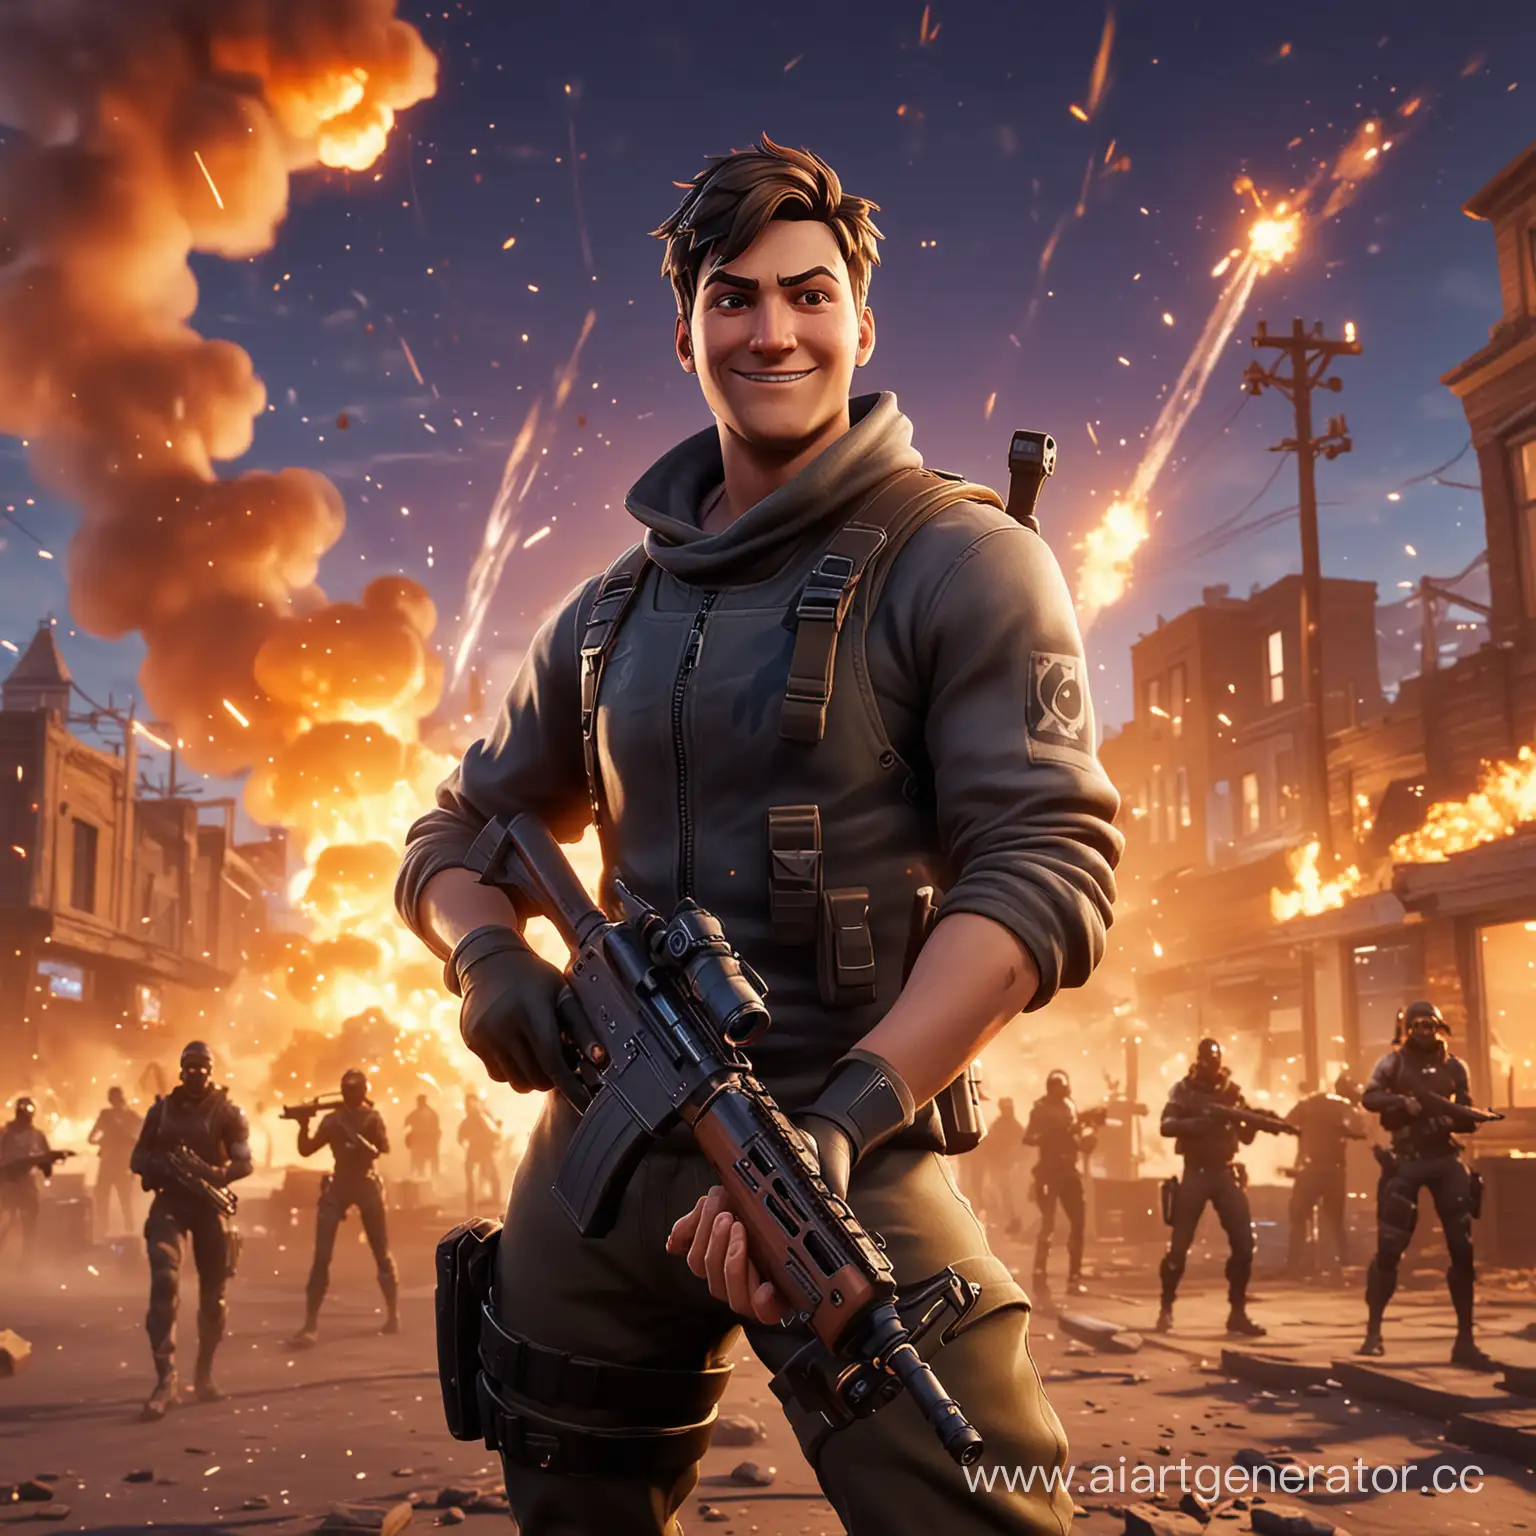 Fortnite-Character-Smiling-with-Rifle-Amid-Explosions